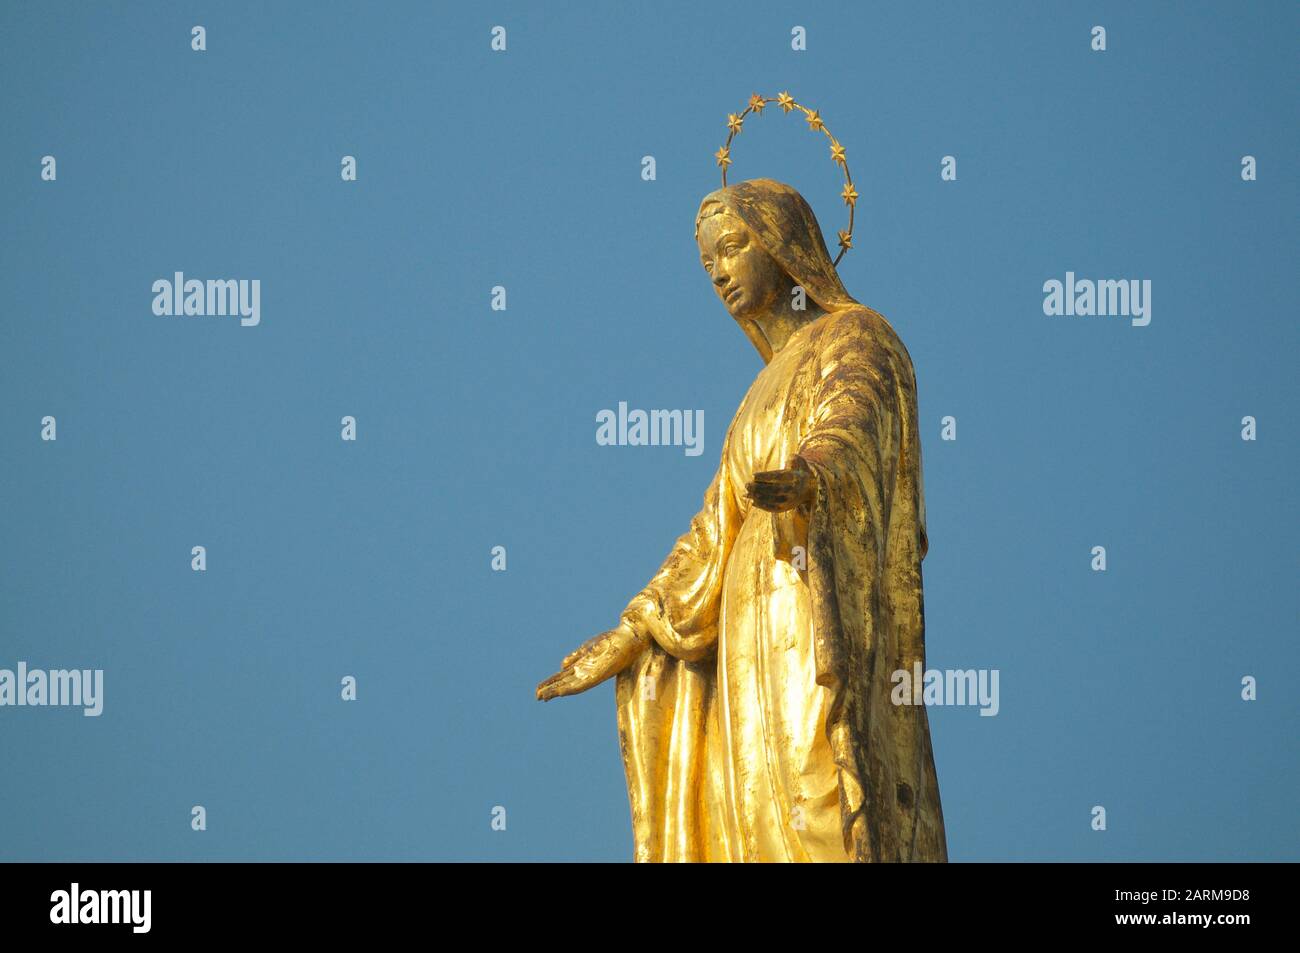 Close up view of the golden Madonnina (Madonna - Immacolata) statue against the blue sky located at the port of Luino in Lombardy, Italy Stock Photo